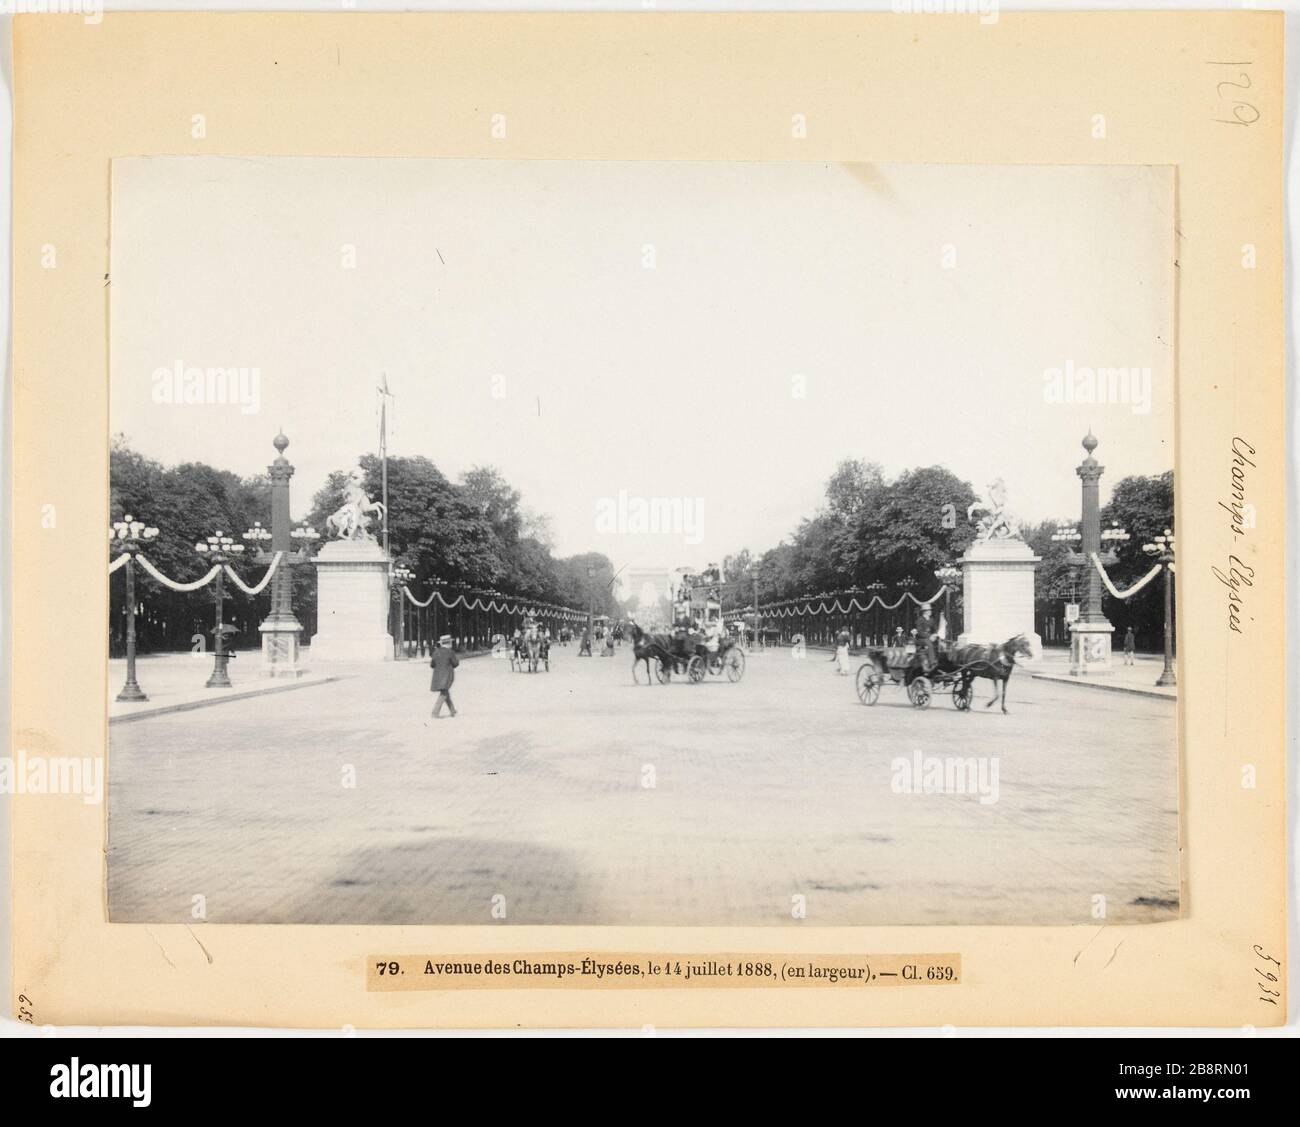 Vintage Paris The Champs Elysees Avenue and the Horses of Marly